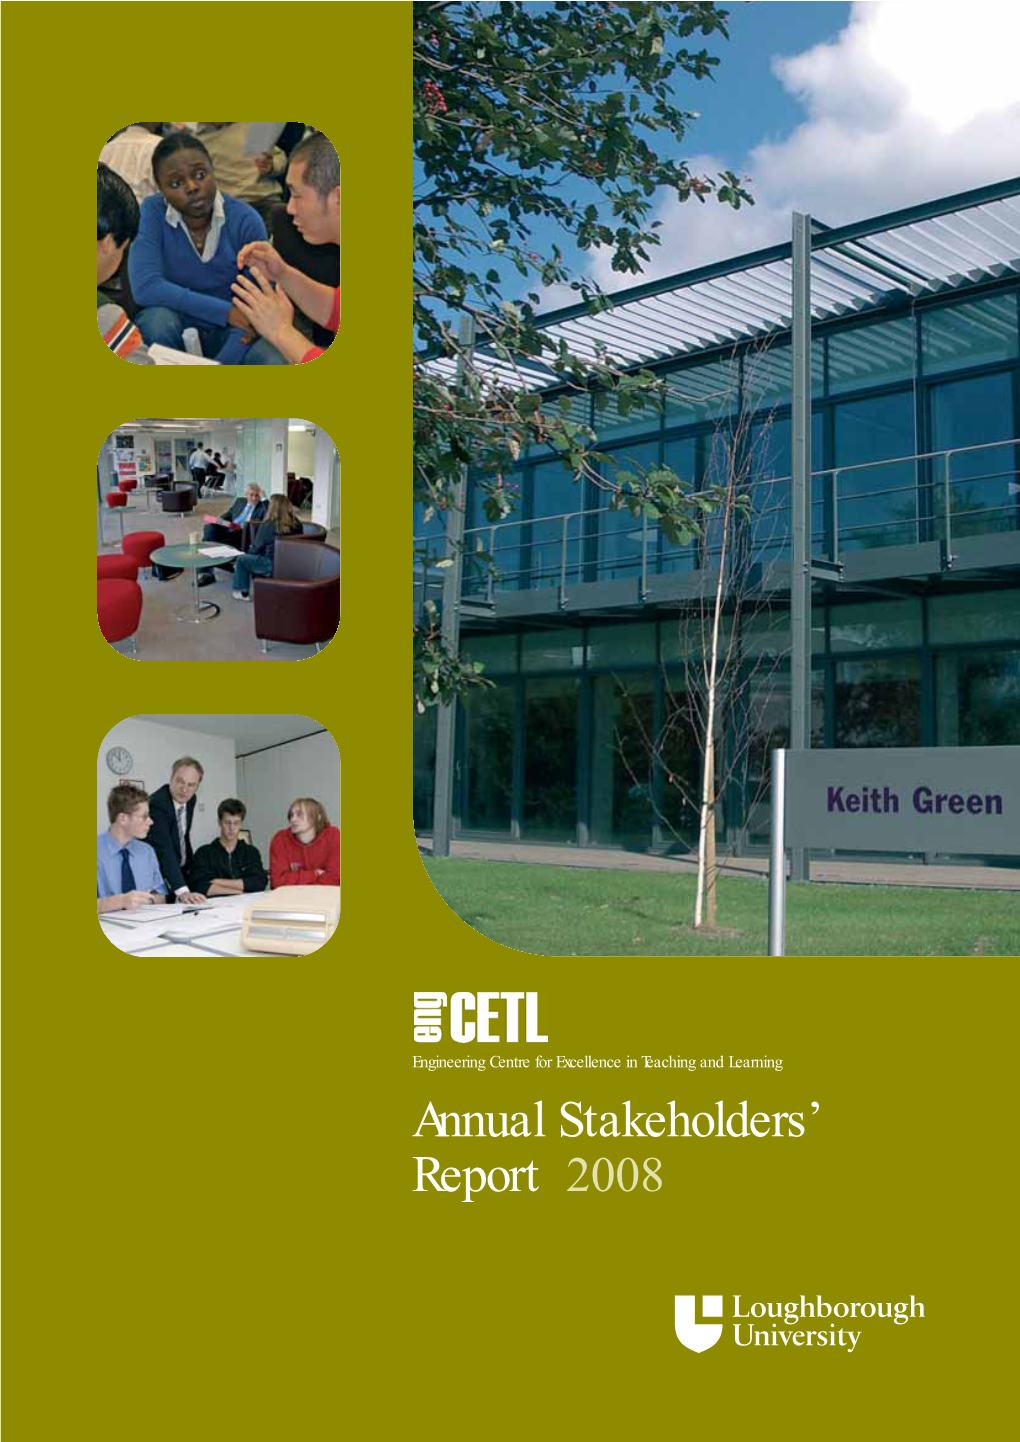 Annual Stakeholders' Report 2008